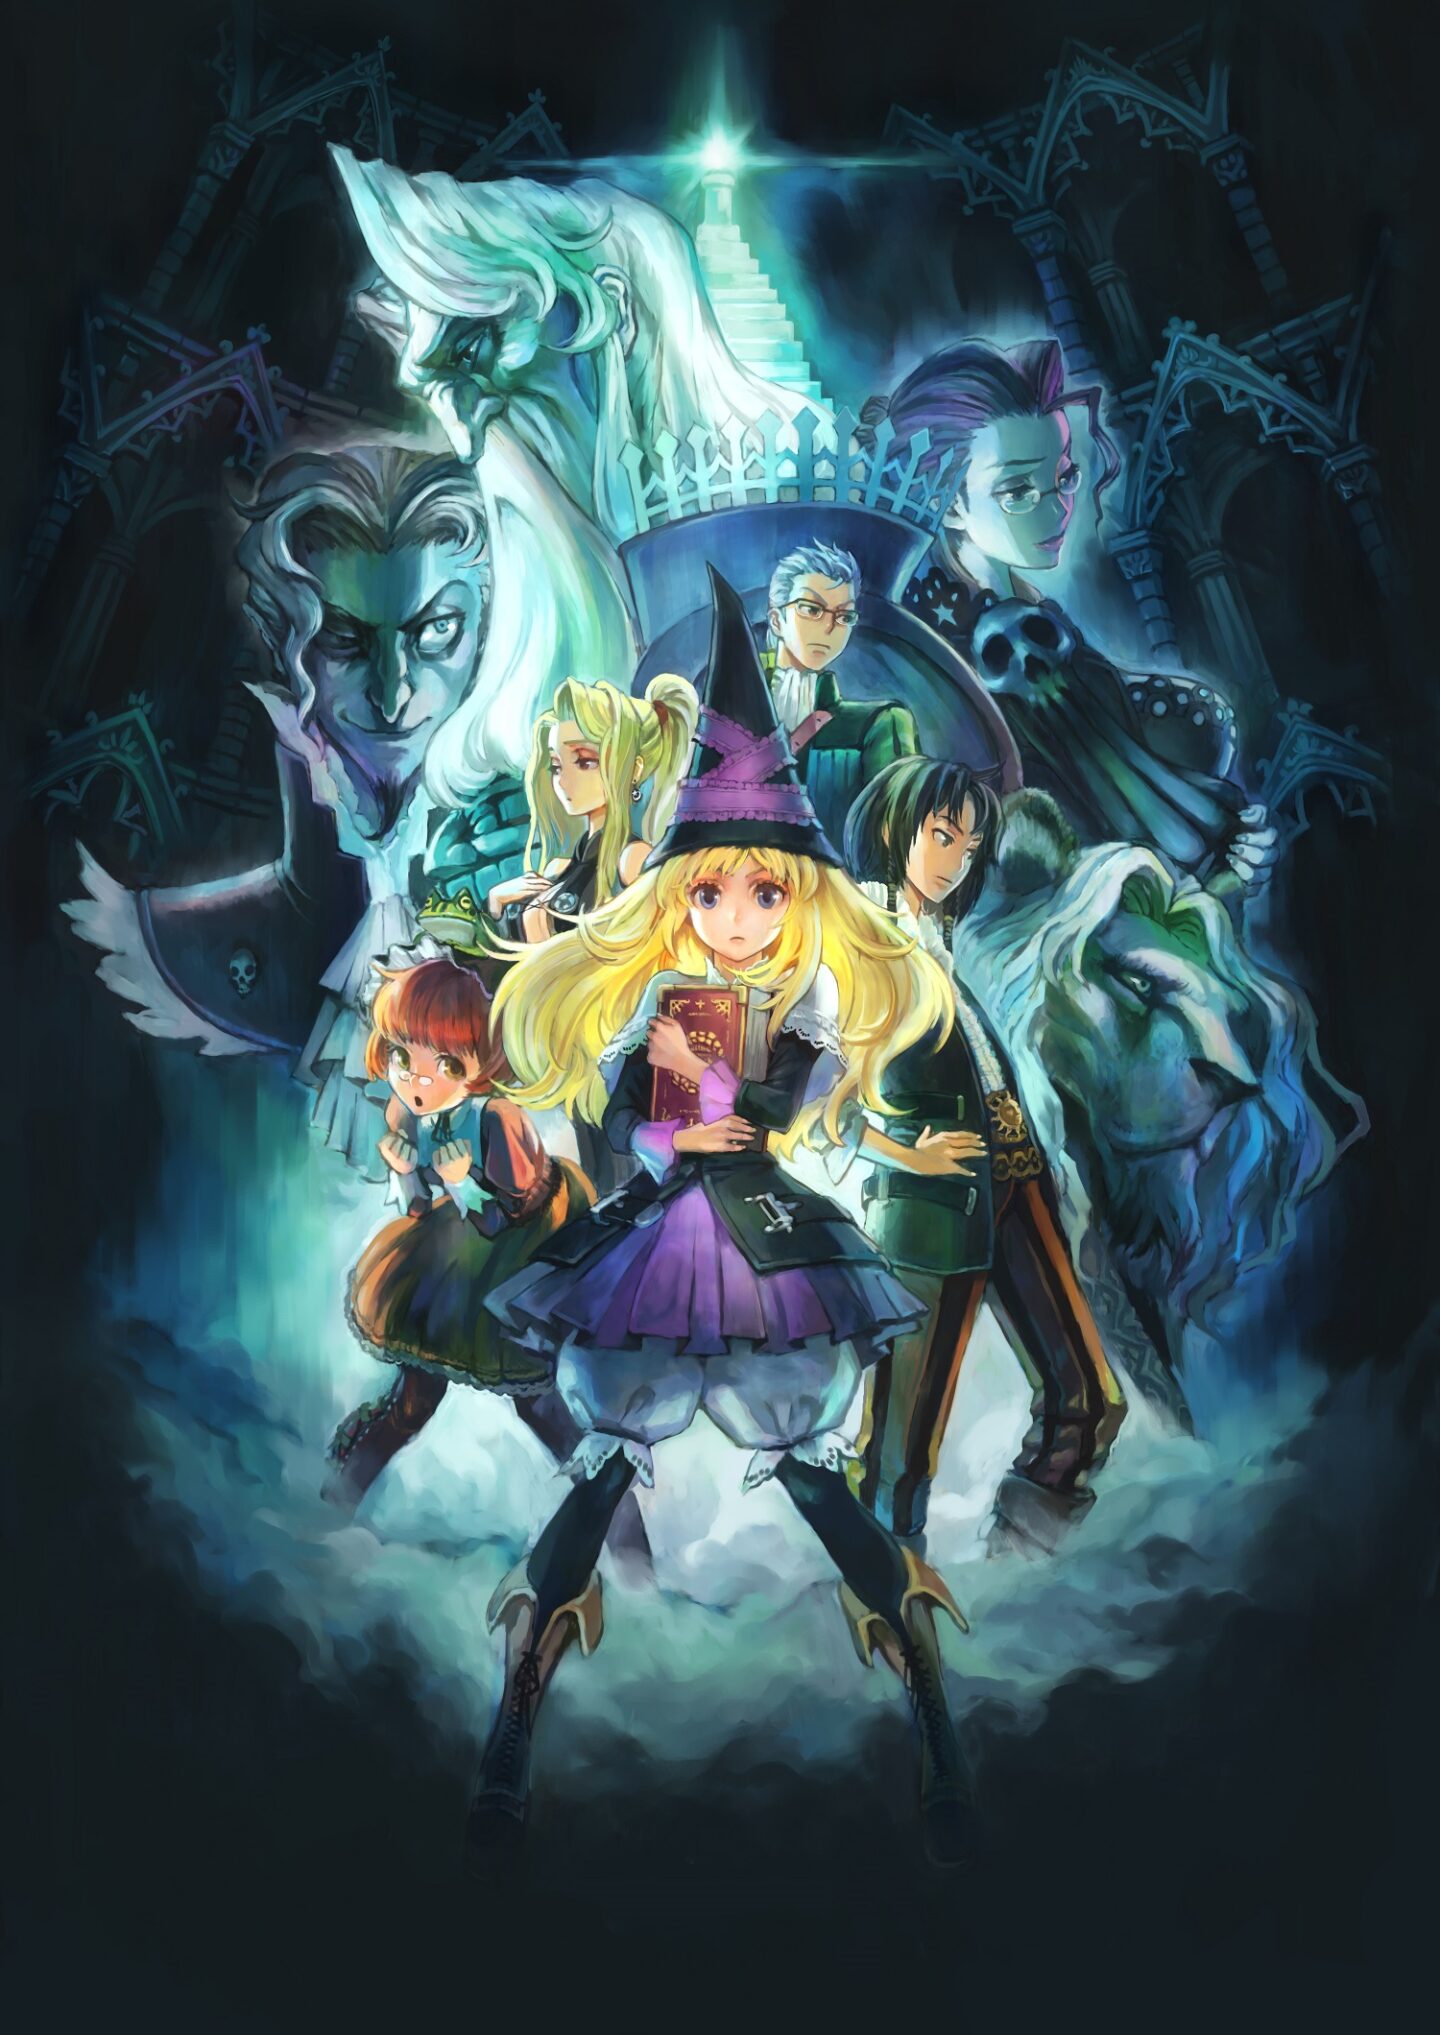 A blonde witch stands in front of seven other characters. Four are smaller than her, with two larger looming behind them all.